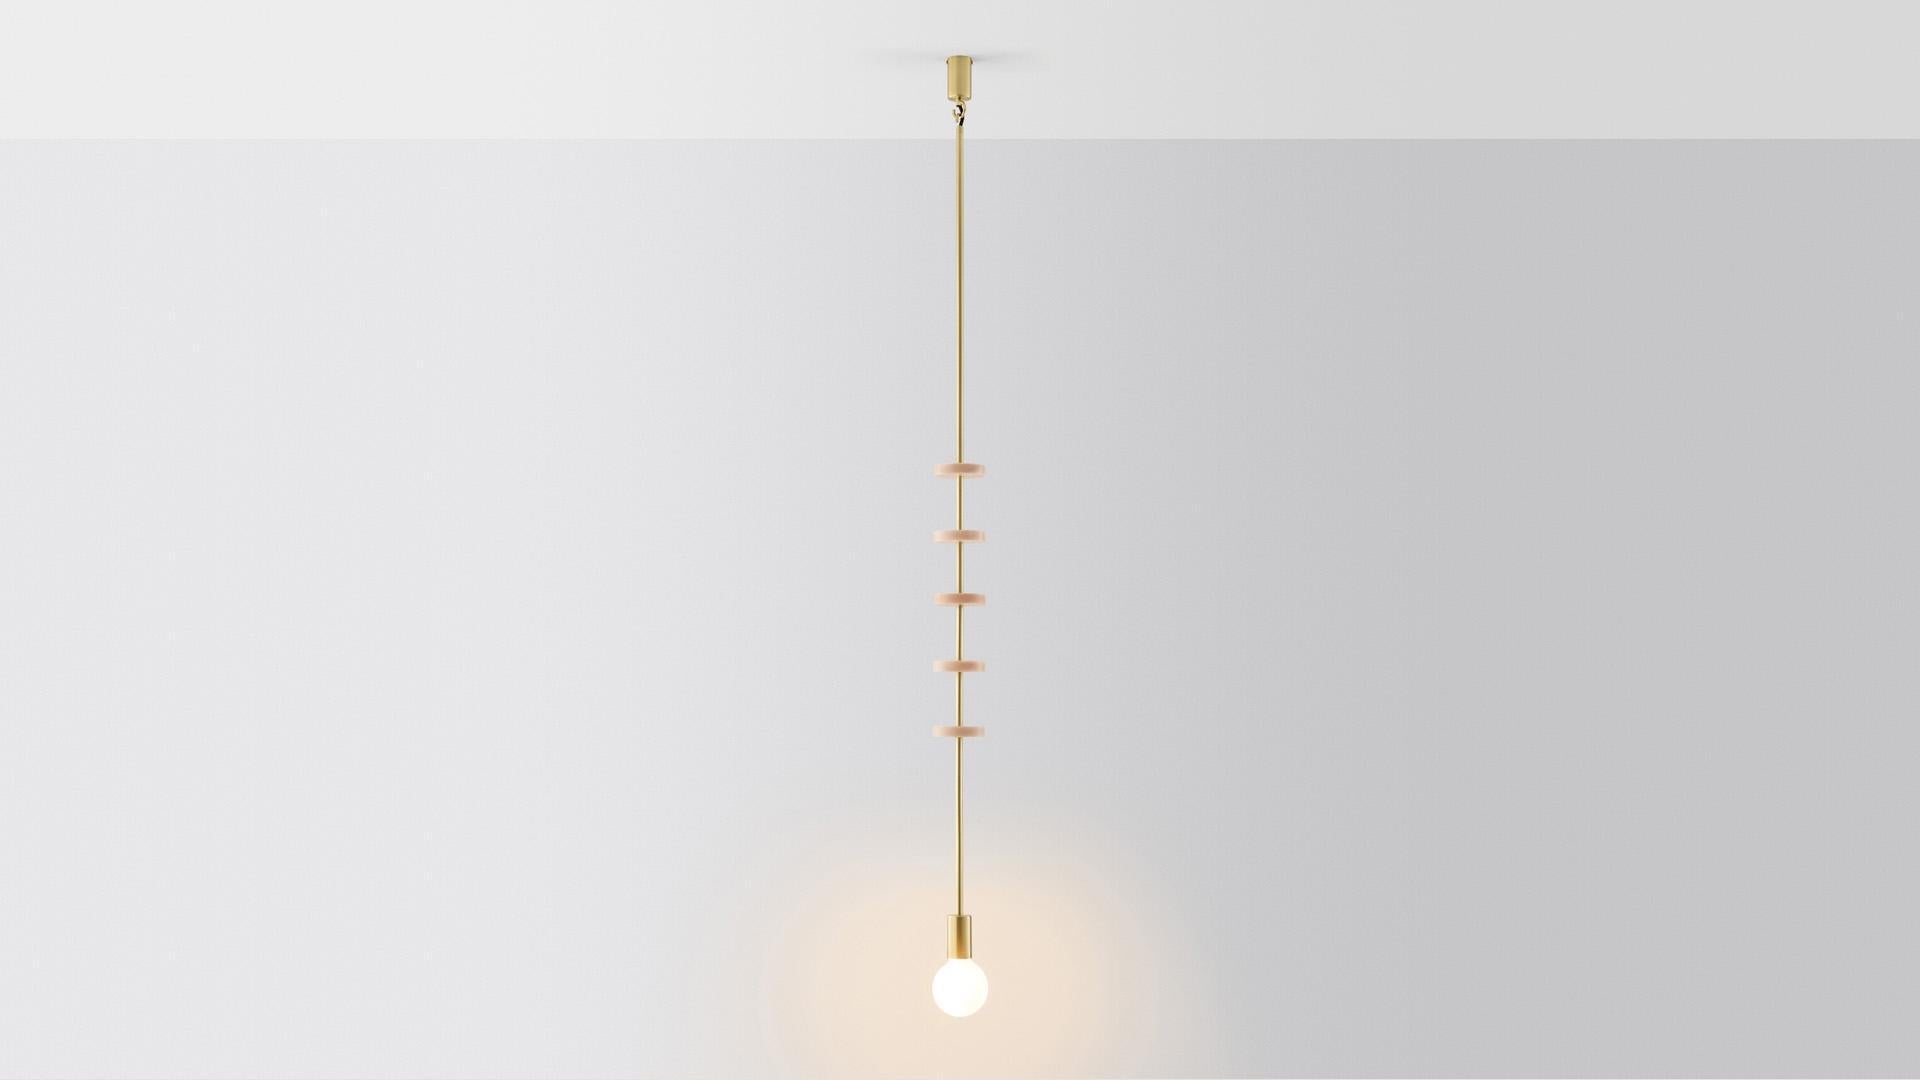 Discus 5 pendant light by Volker Haug
Dimensions: Diameter 9 x H 106 cm 
Material: Brass, marble
Finish: Polished, aged, brushed, bronzed, blackened, or plated
Marble Disc: As specified (shown in pink marble)
Lamp: Opal G95 LED (E26/E27 110 -